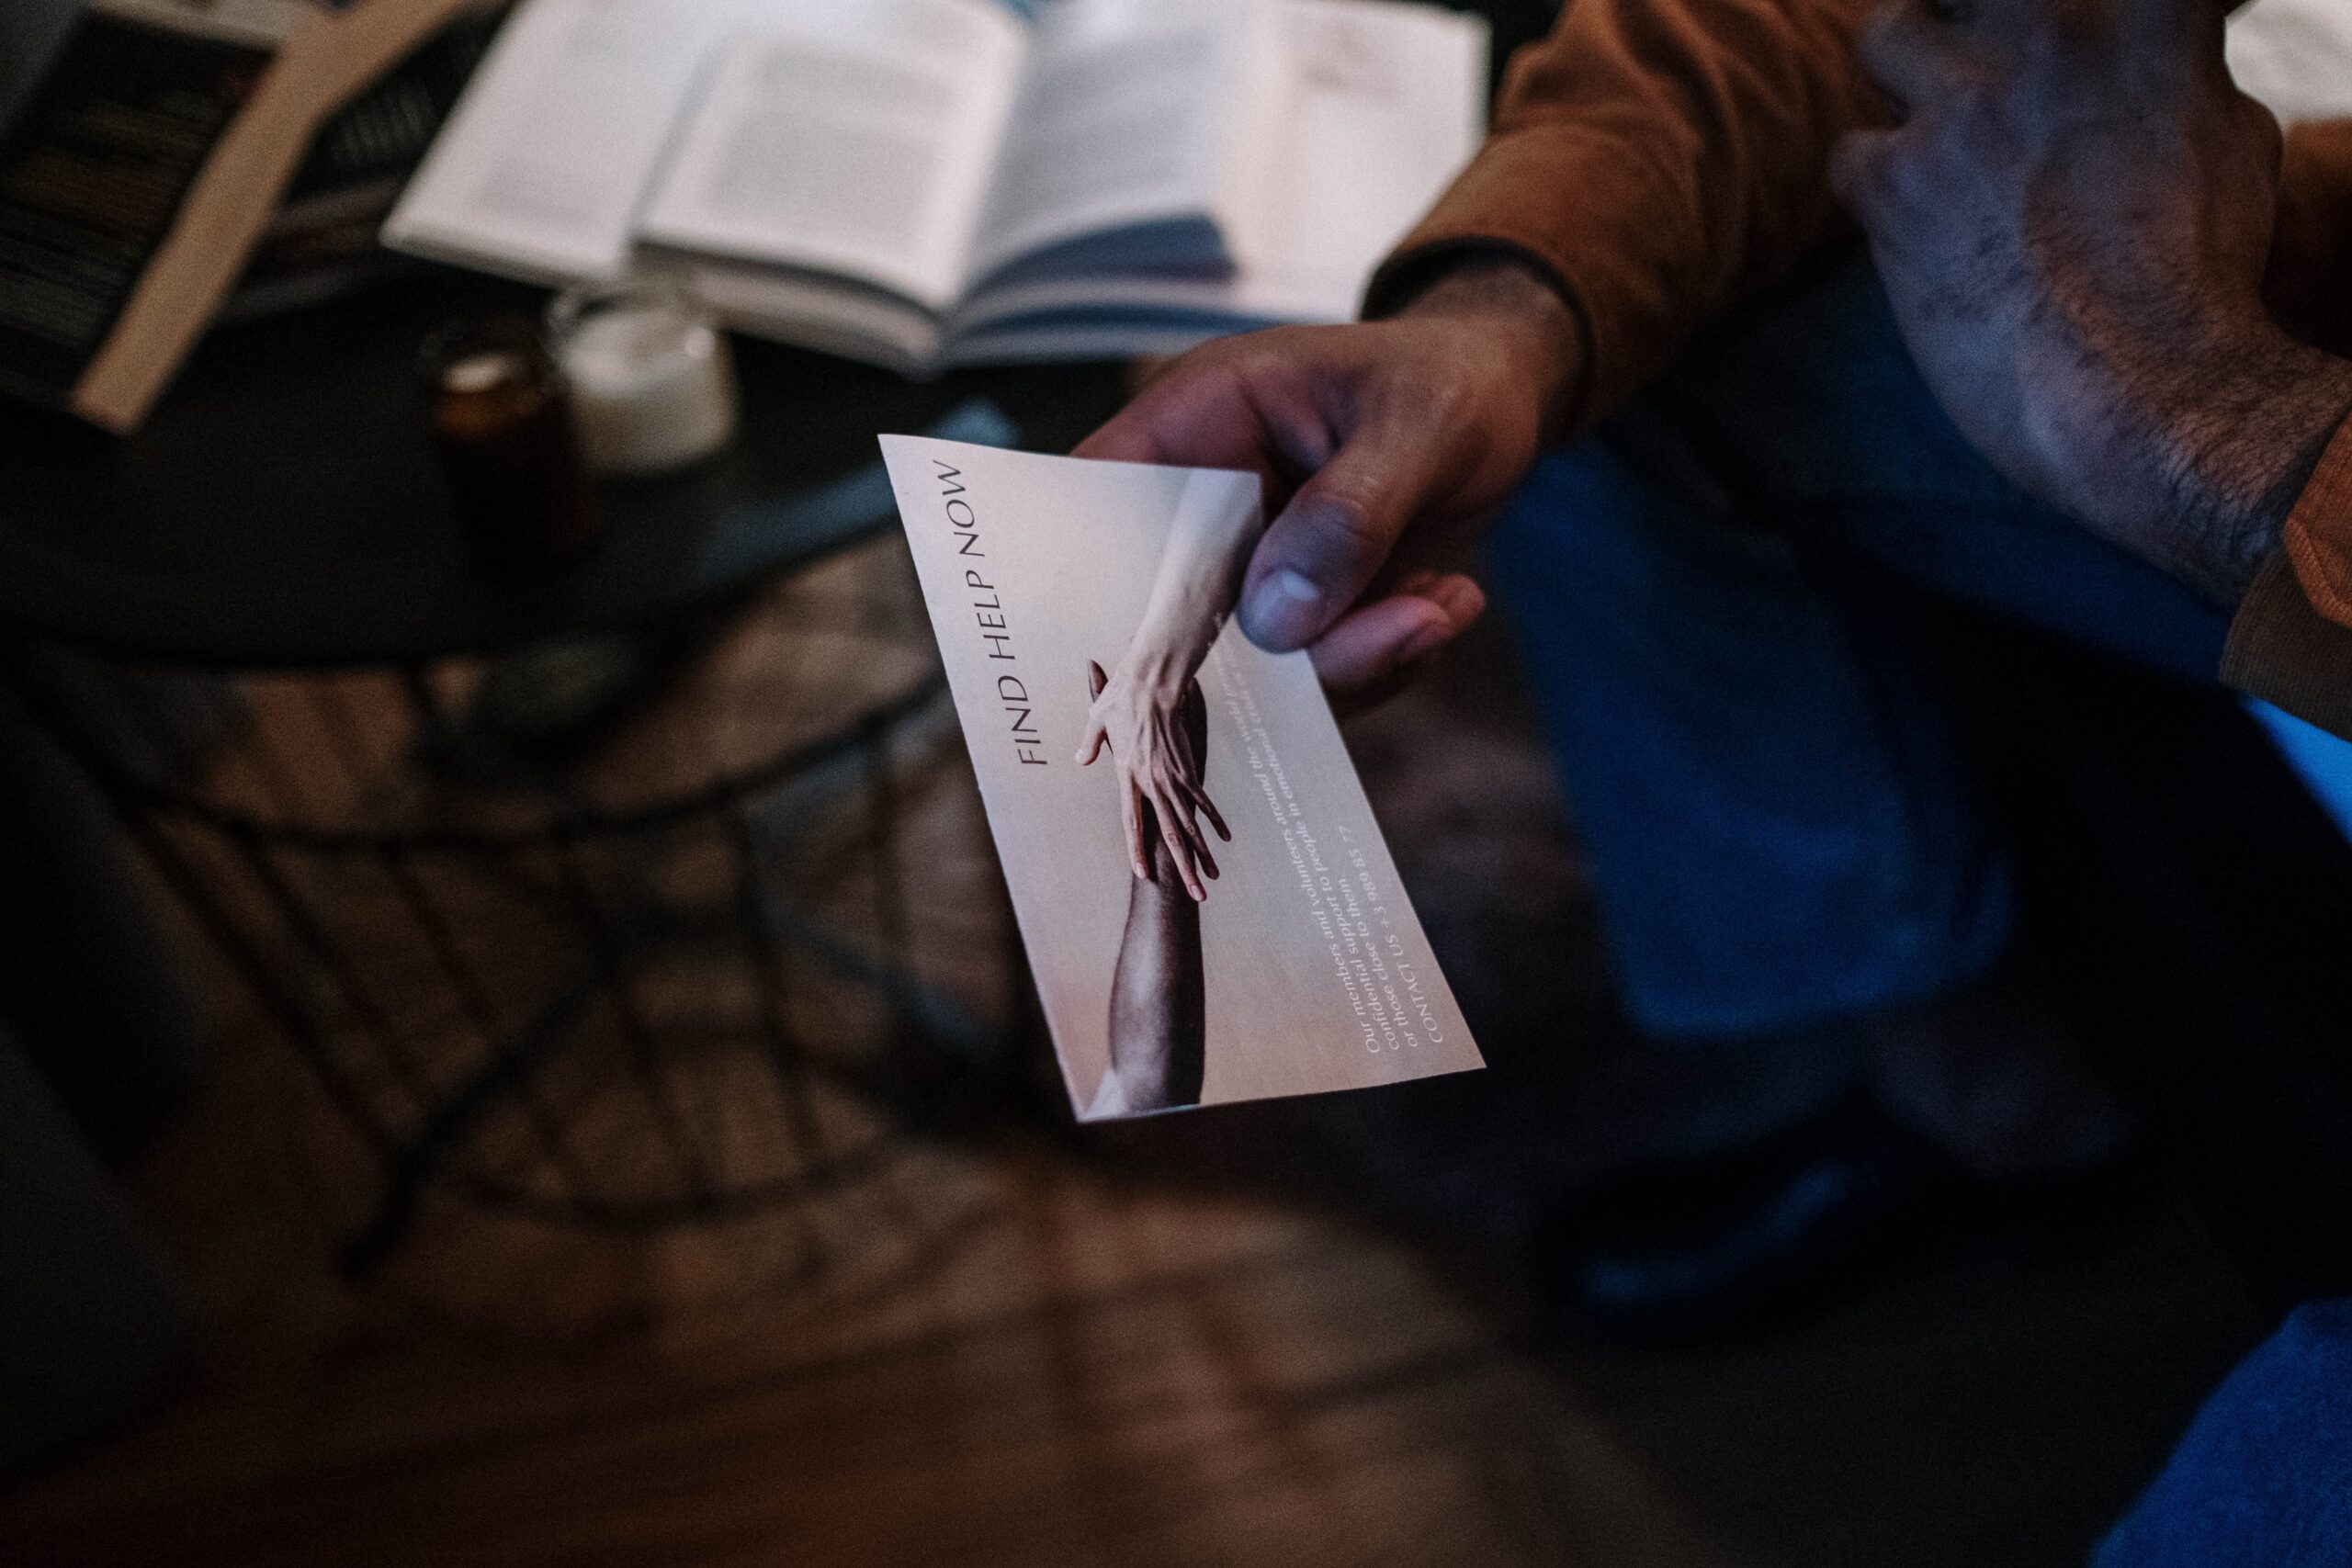 The hand of an African American male holding a postcard depicting white and black arms stretching toward each other and says "Find Help Now"